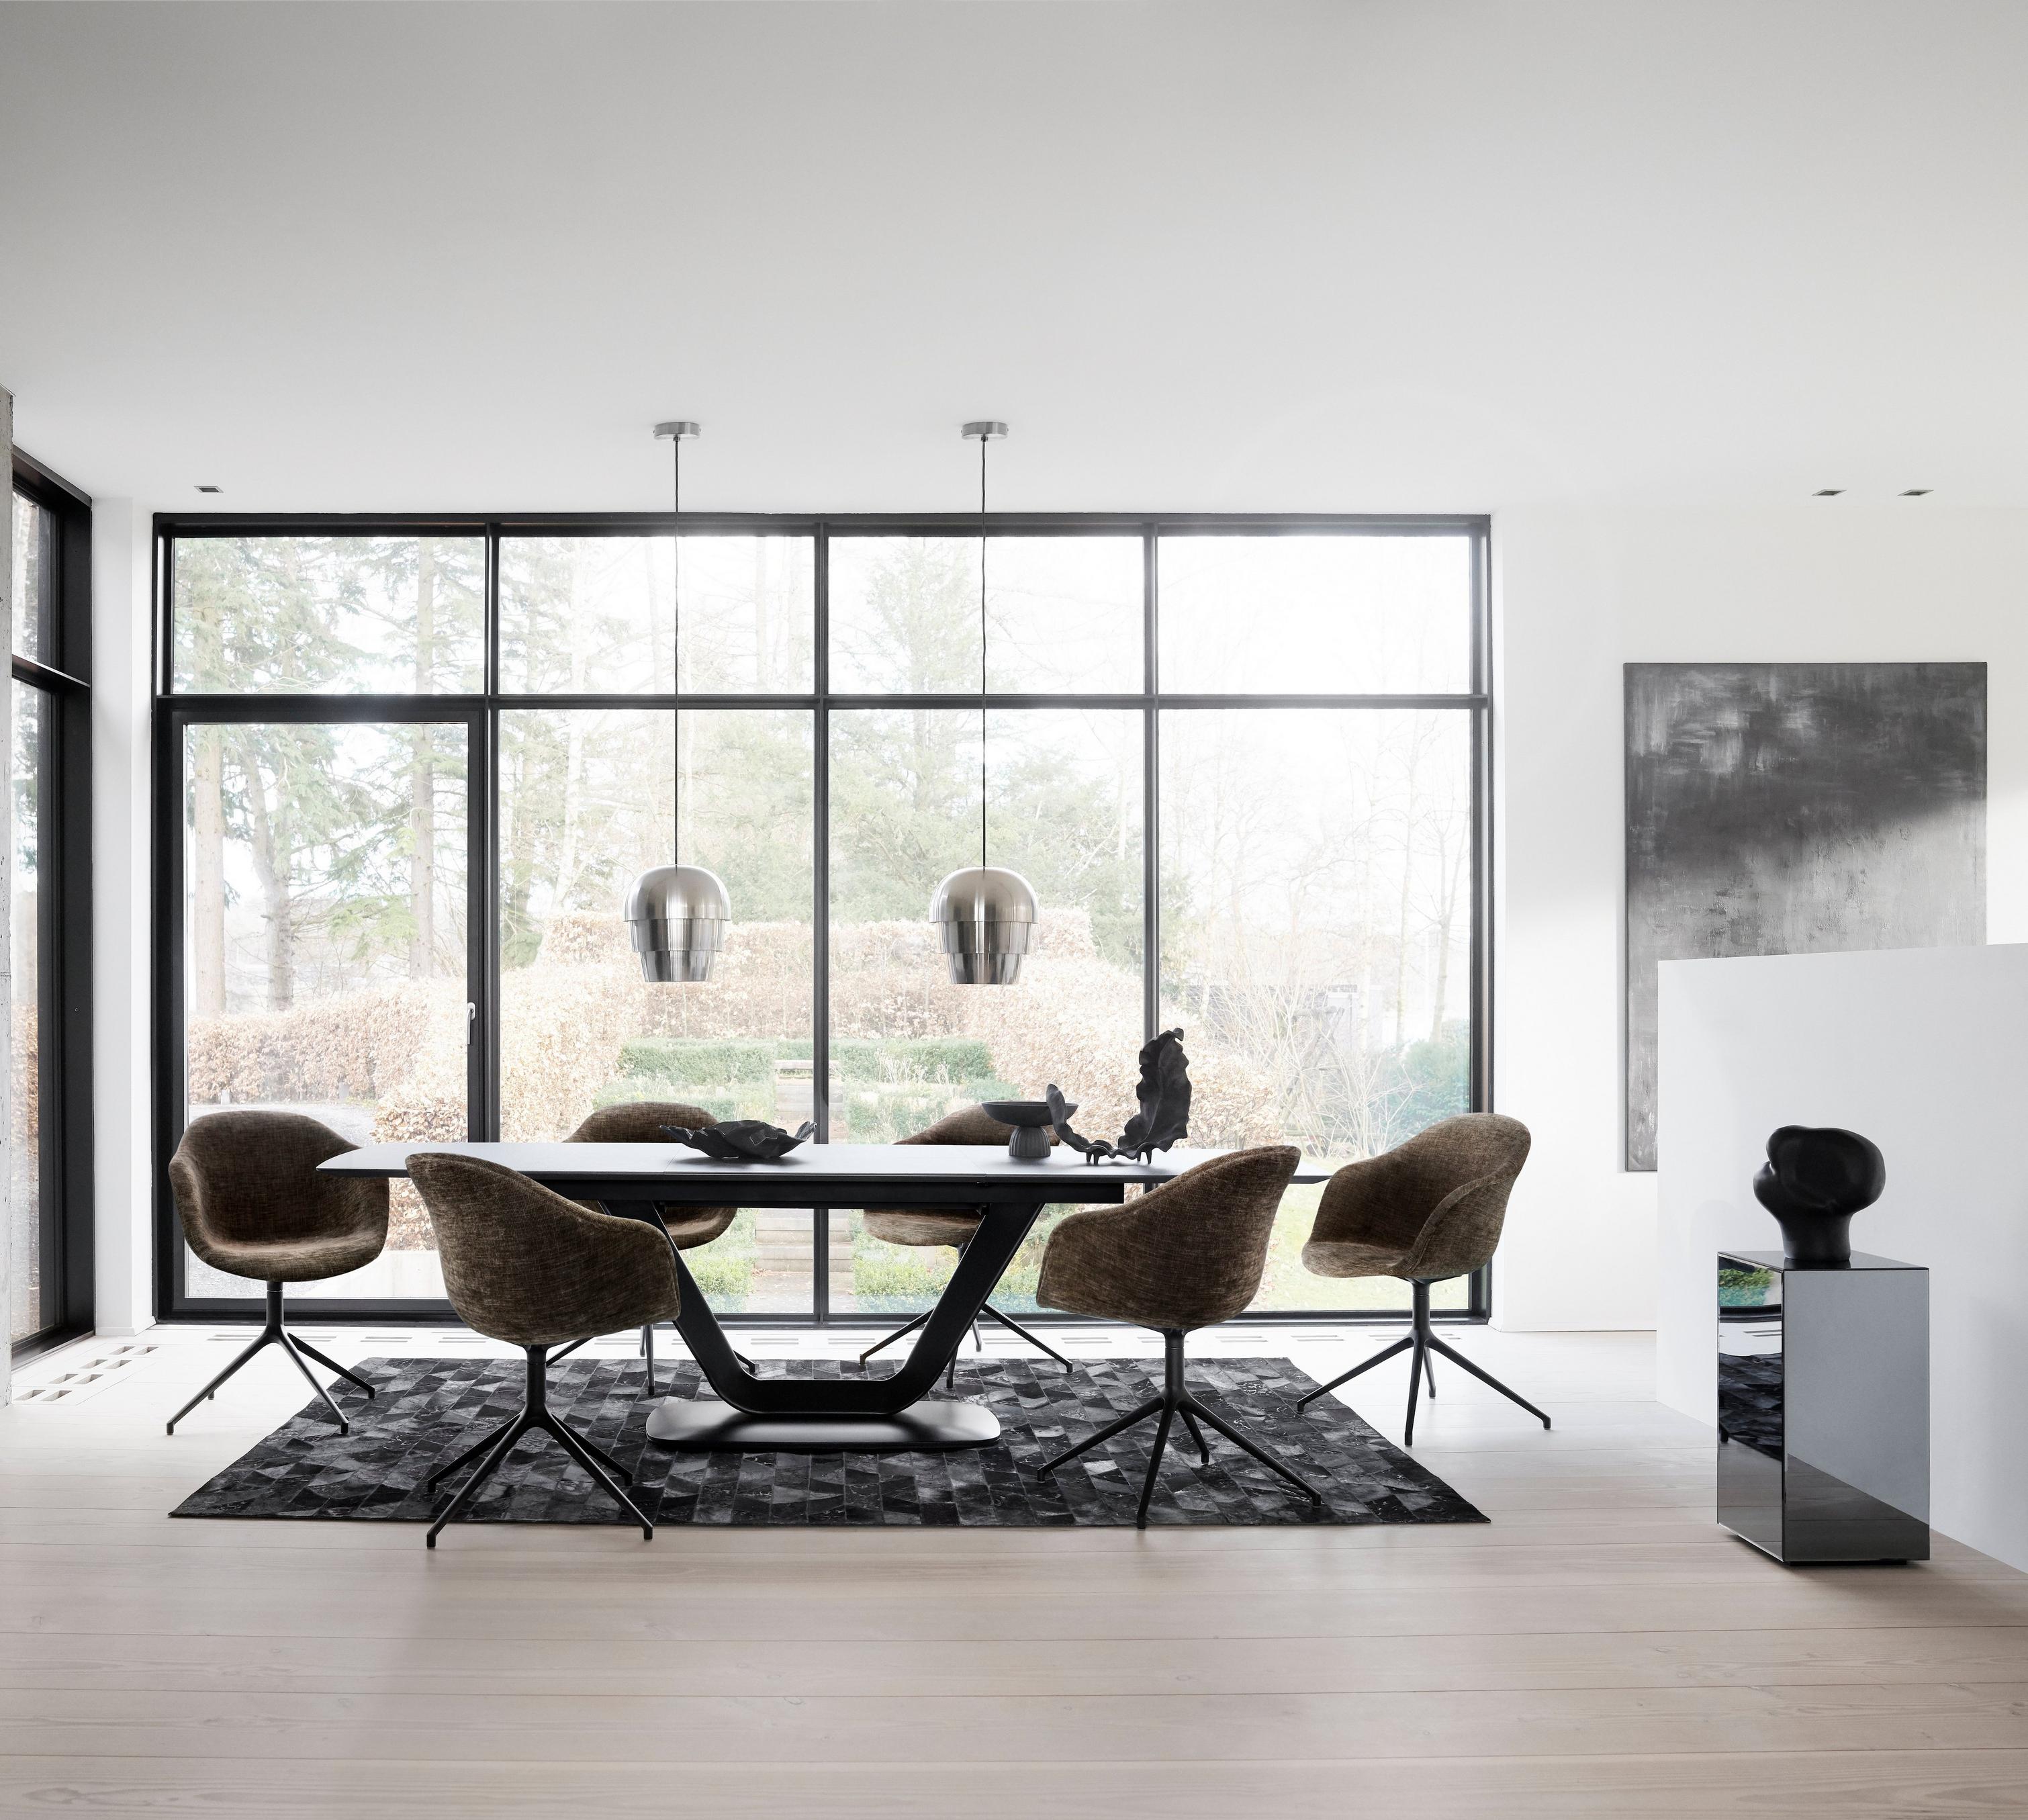 Modern dining room with textured chairs, a sleek table, art pieces, and floor-to-ceiling windows.